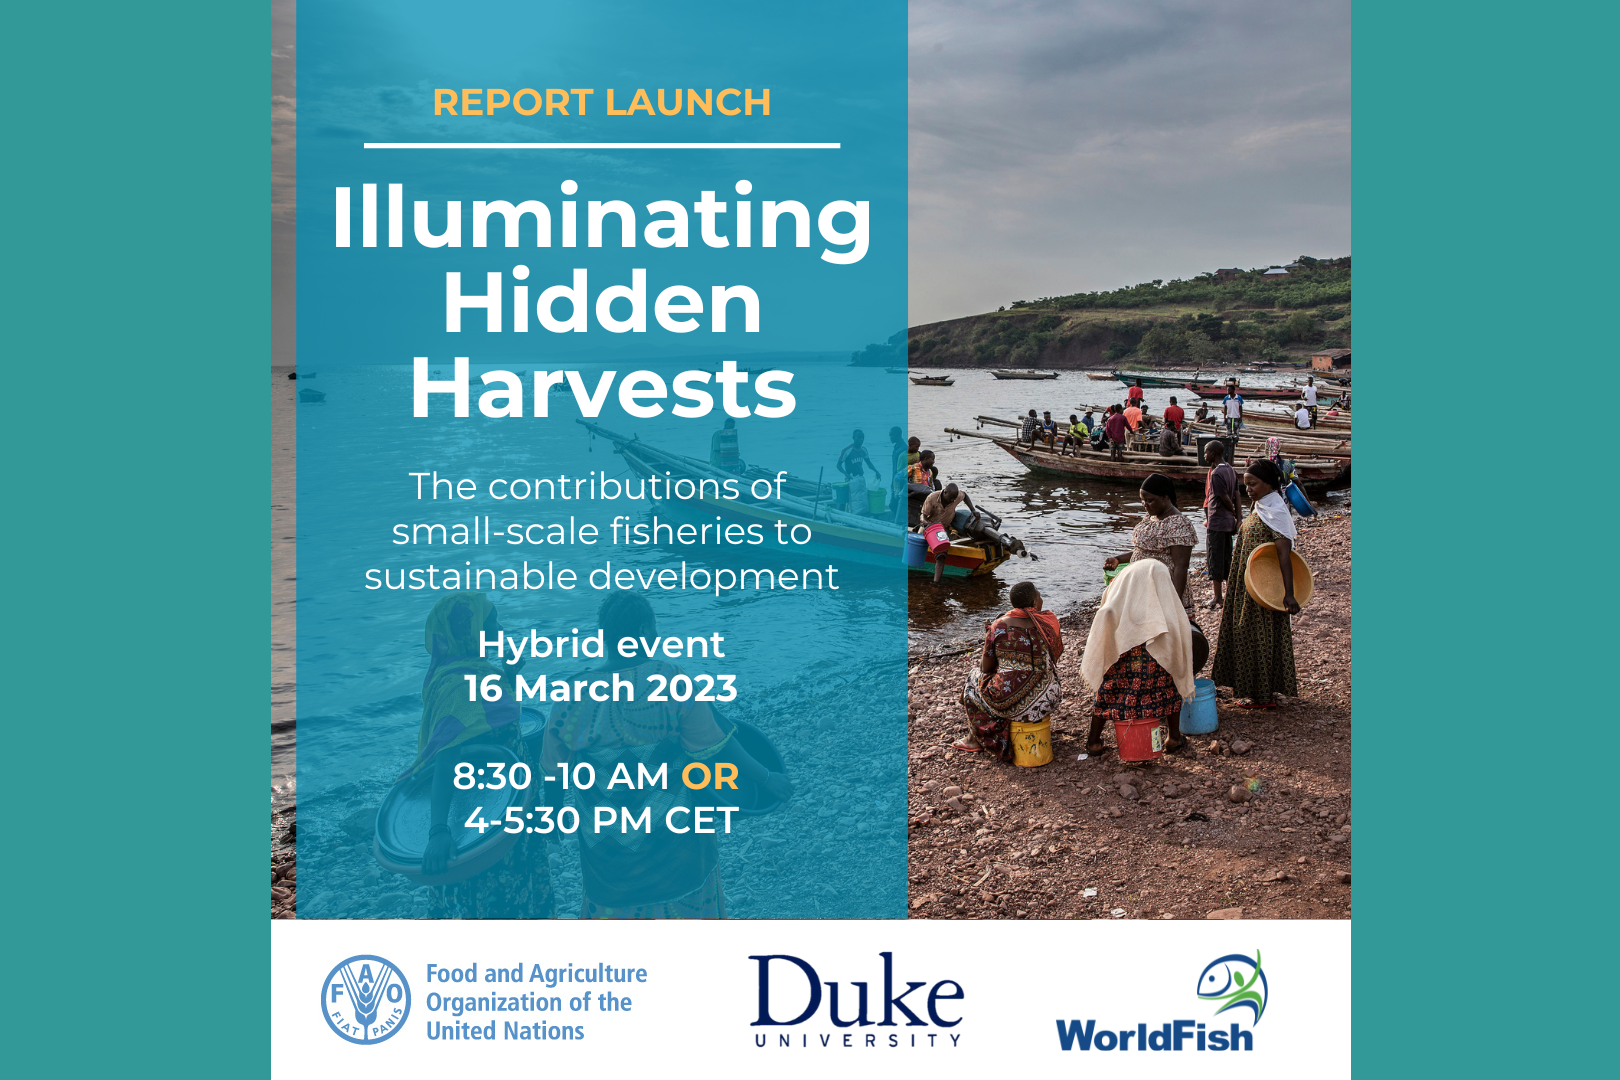 Photo of women buying fish on shore of Lake Tanganyika in Tanzania. Text: &quot;Report launch: Illuminating Hidden Harvests. The contributions of small-scale fisheries to sustainable development. Hybrid event. 16 March 2023. 8:30-10 a.m. OR 4-5:30 p.m. CET.&quot; Logos for FAO, Duke University, and WorldFish.